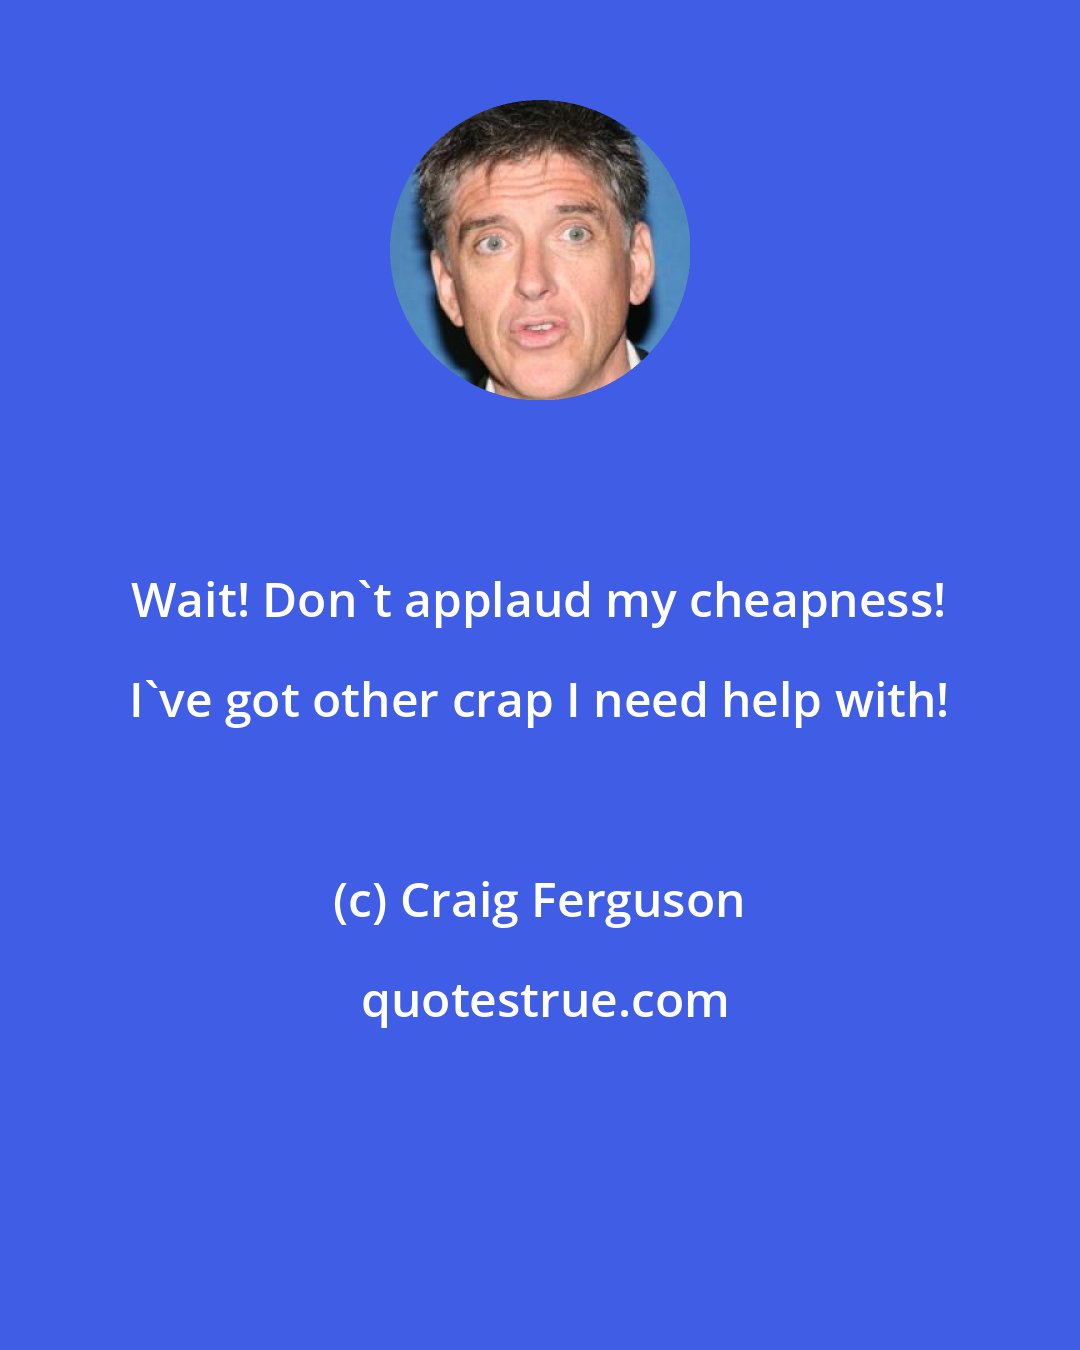 Craig Ferguson: Wait! Don't applaud my cheapness! I've got other crap I need help with!